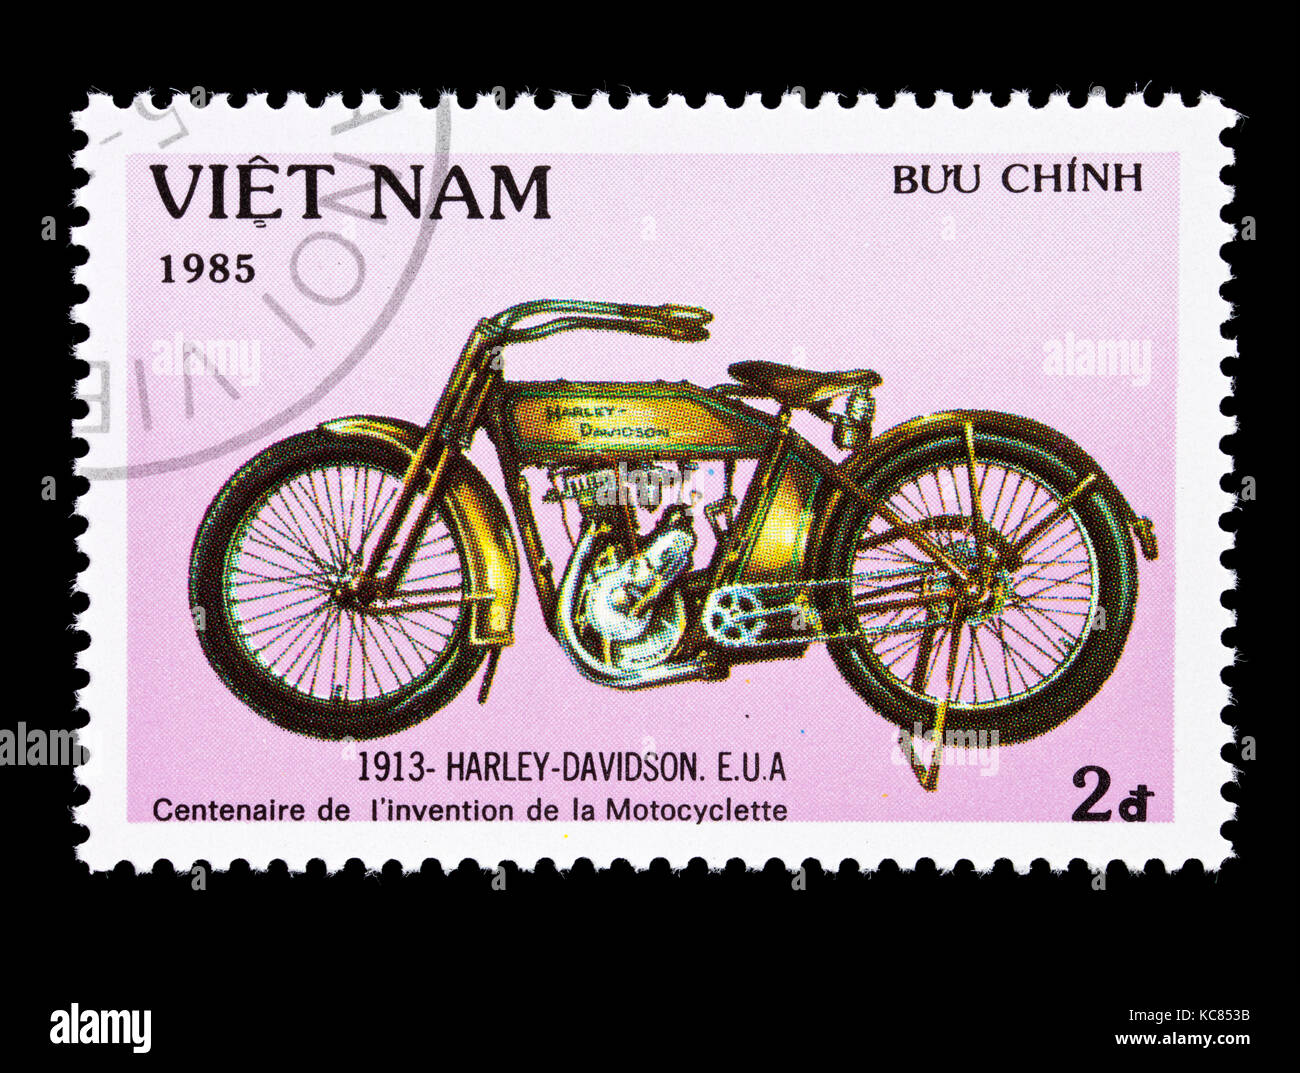 Postage stamp from Vietnam depicting a 1913 Harley Davidson E.U.S motorcycle, centennial of motorcycle invention. Stock Photo